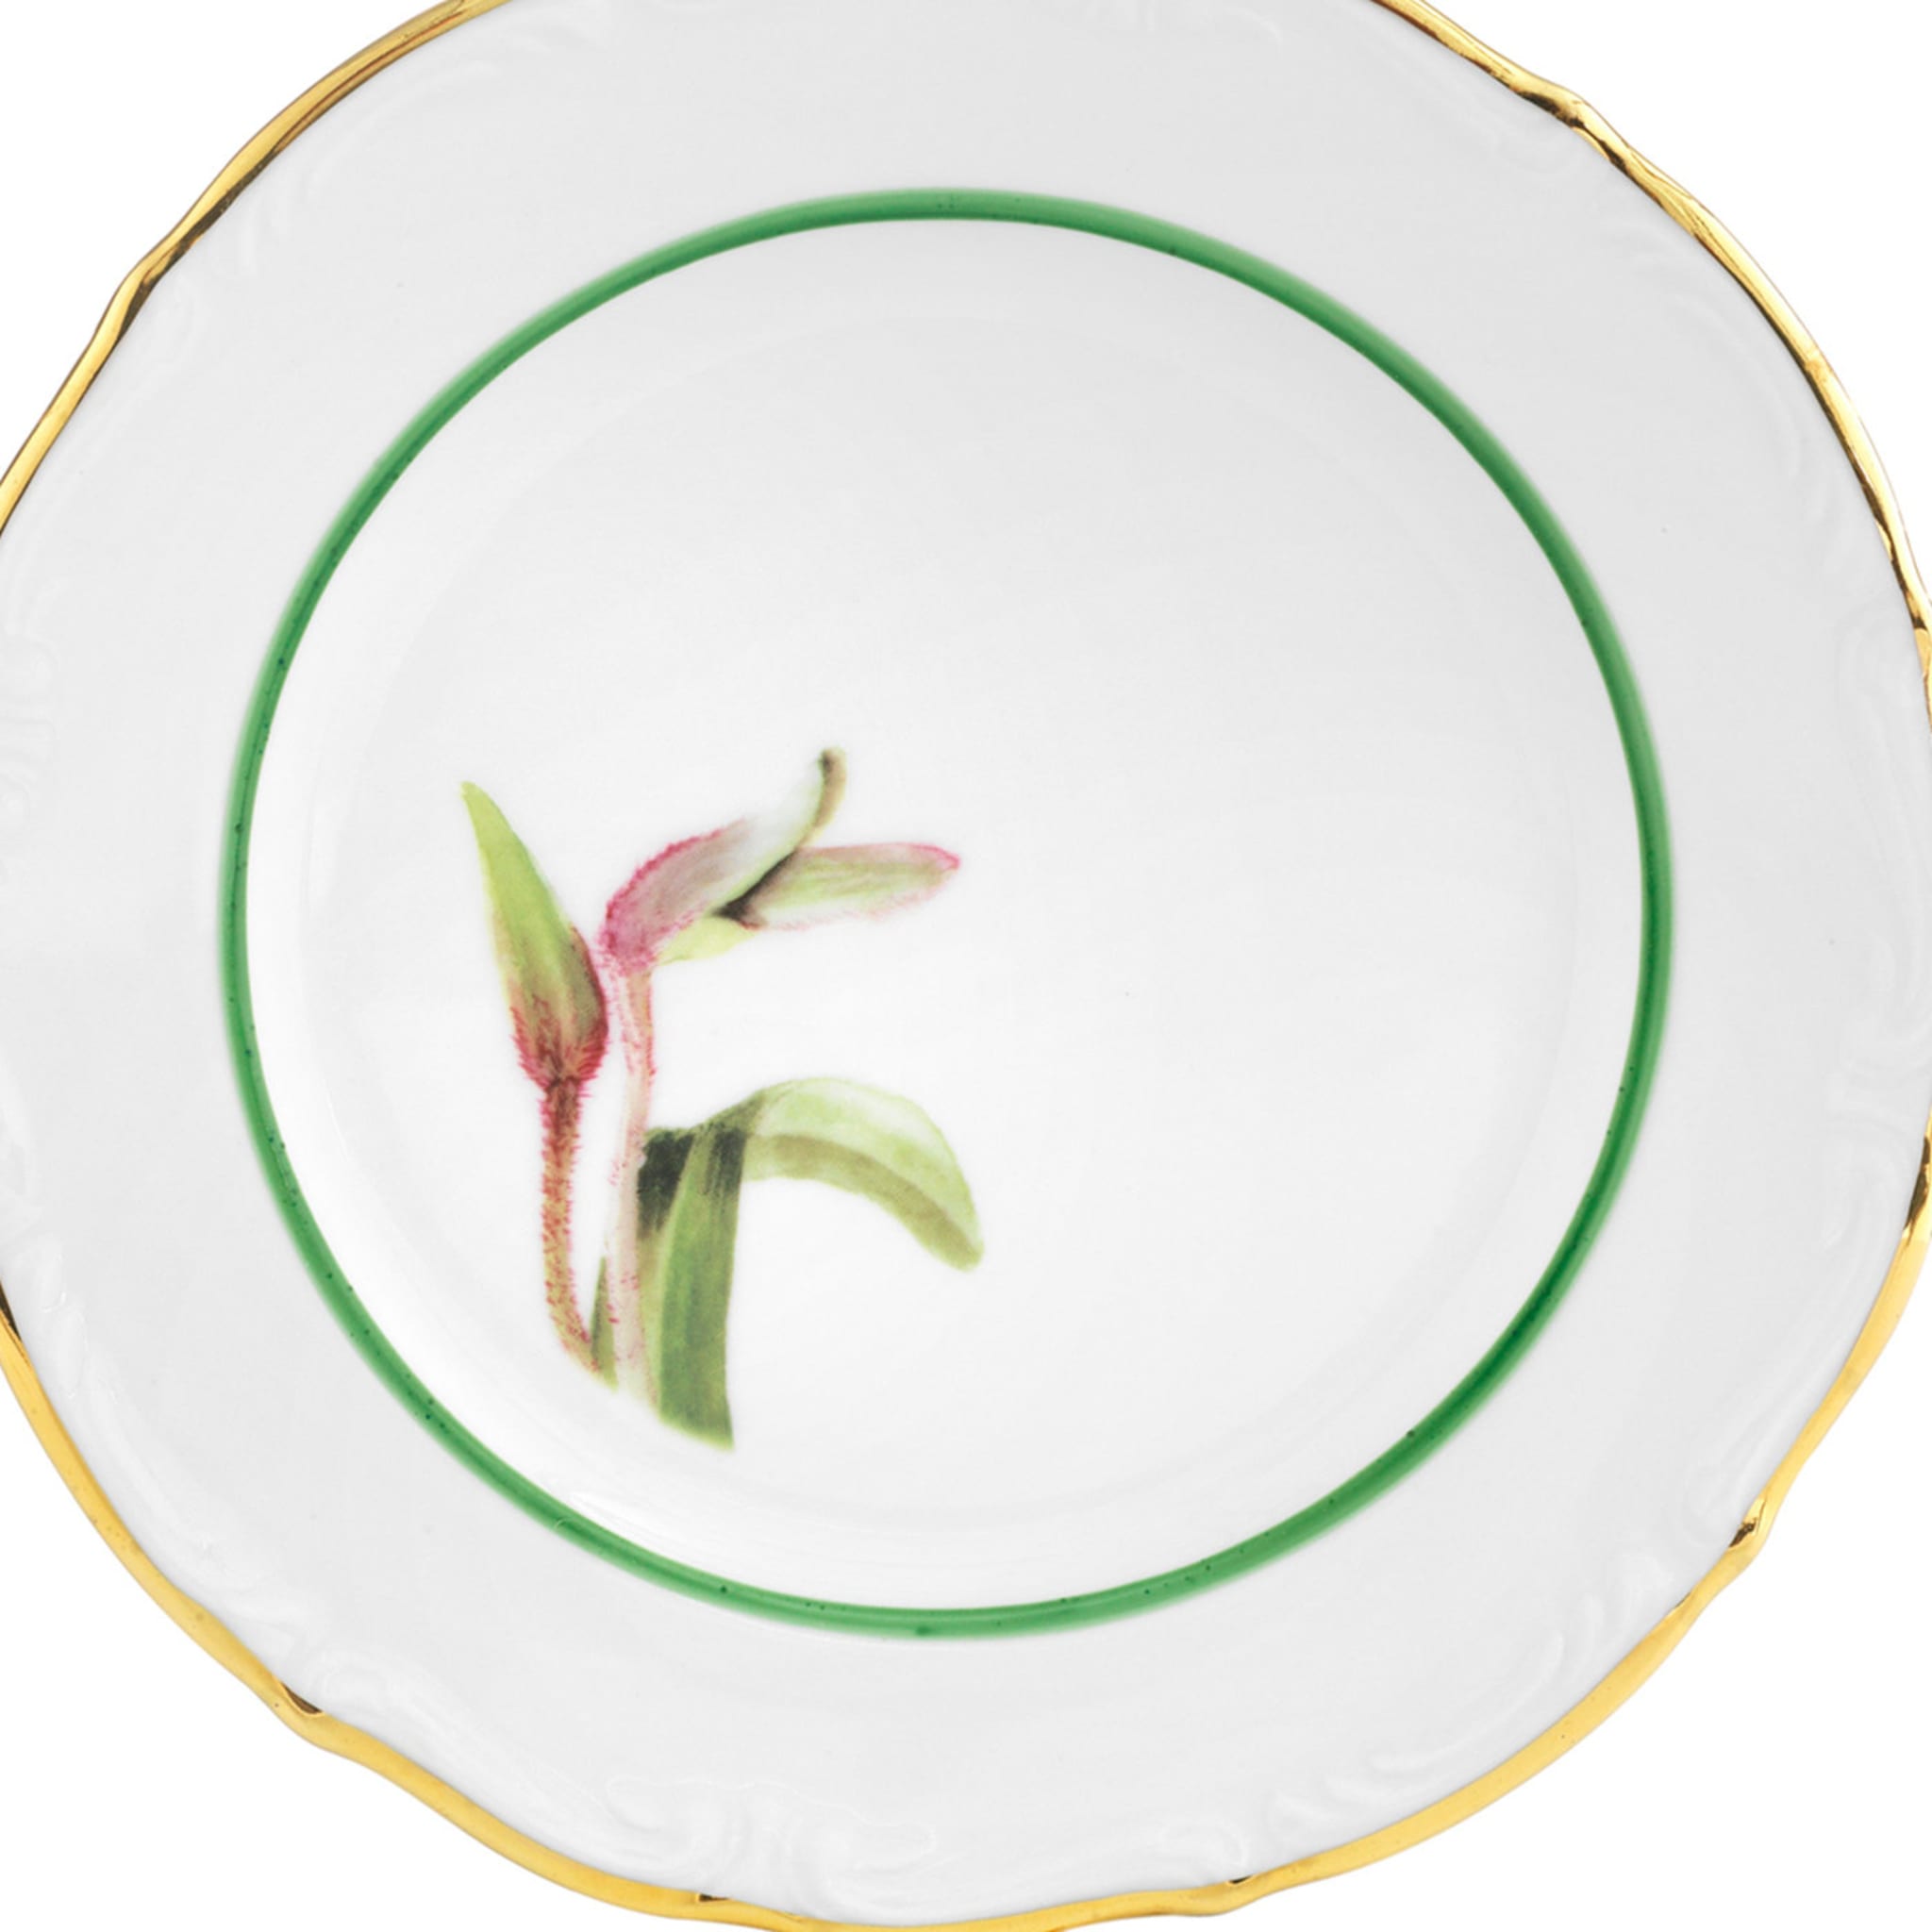 Orchidee Set of 3 Plates - Alternative view 1